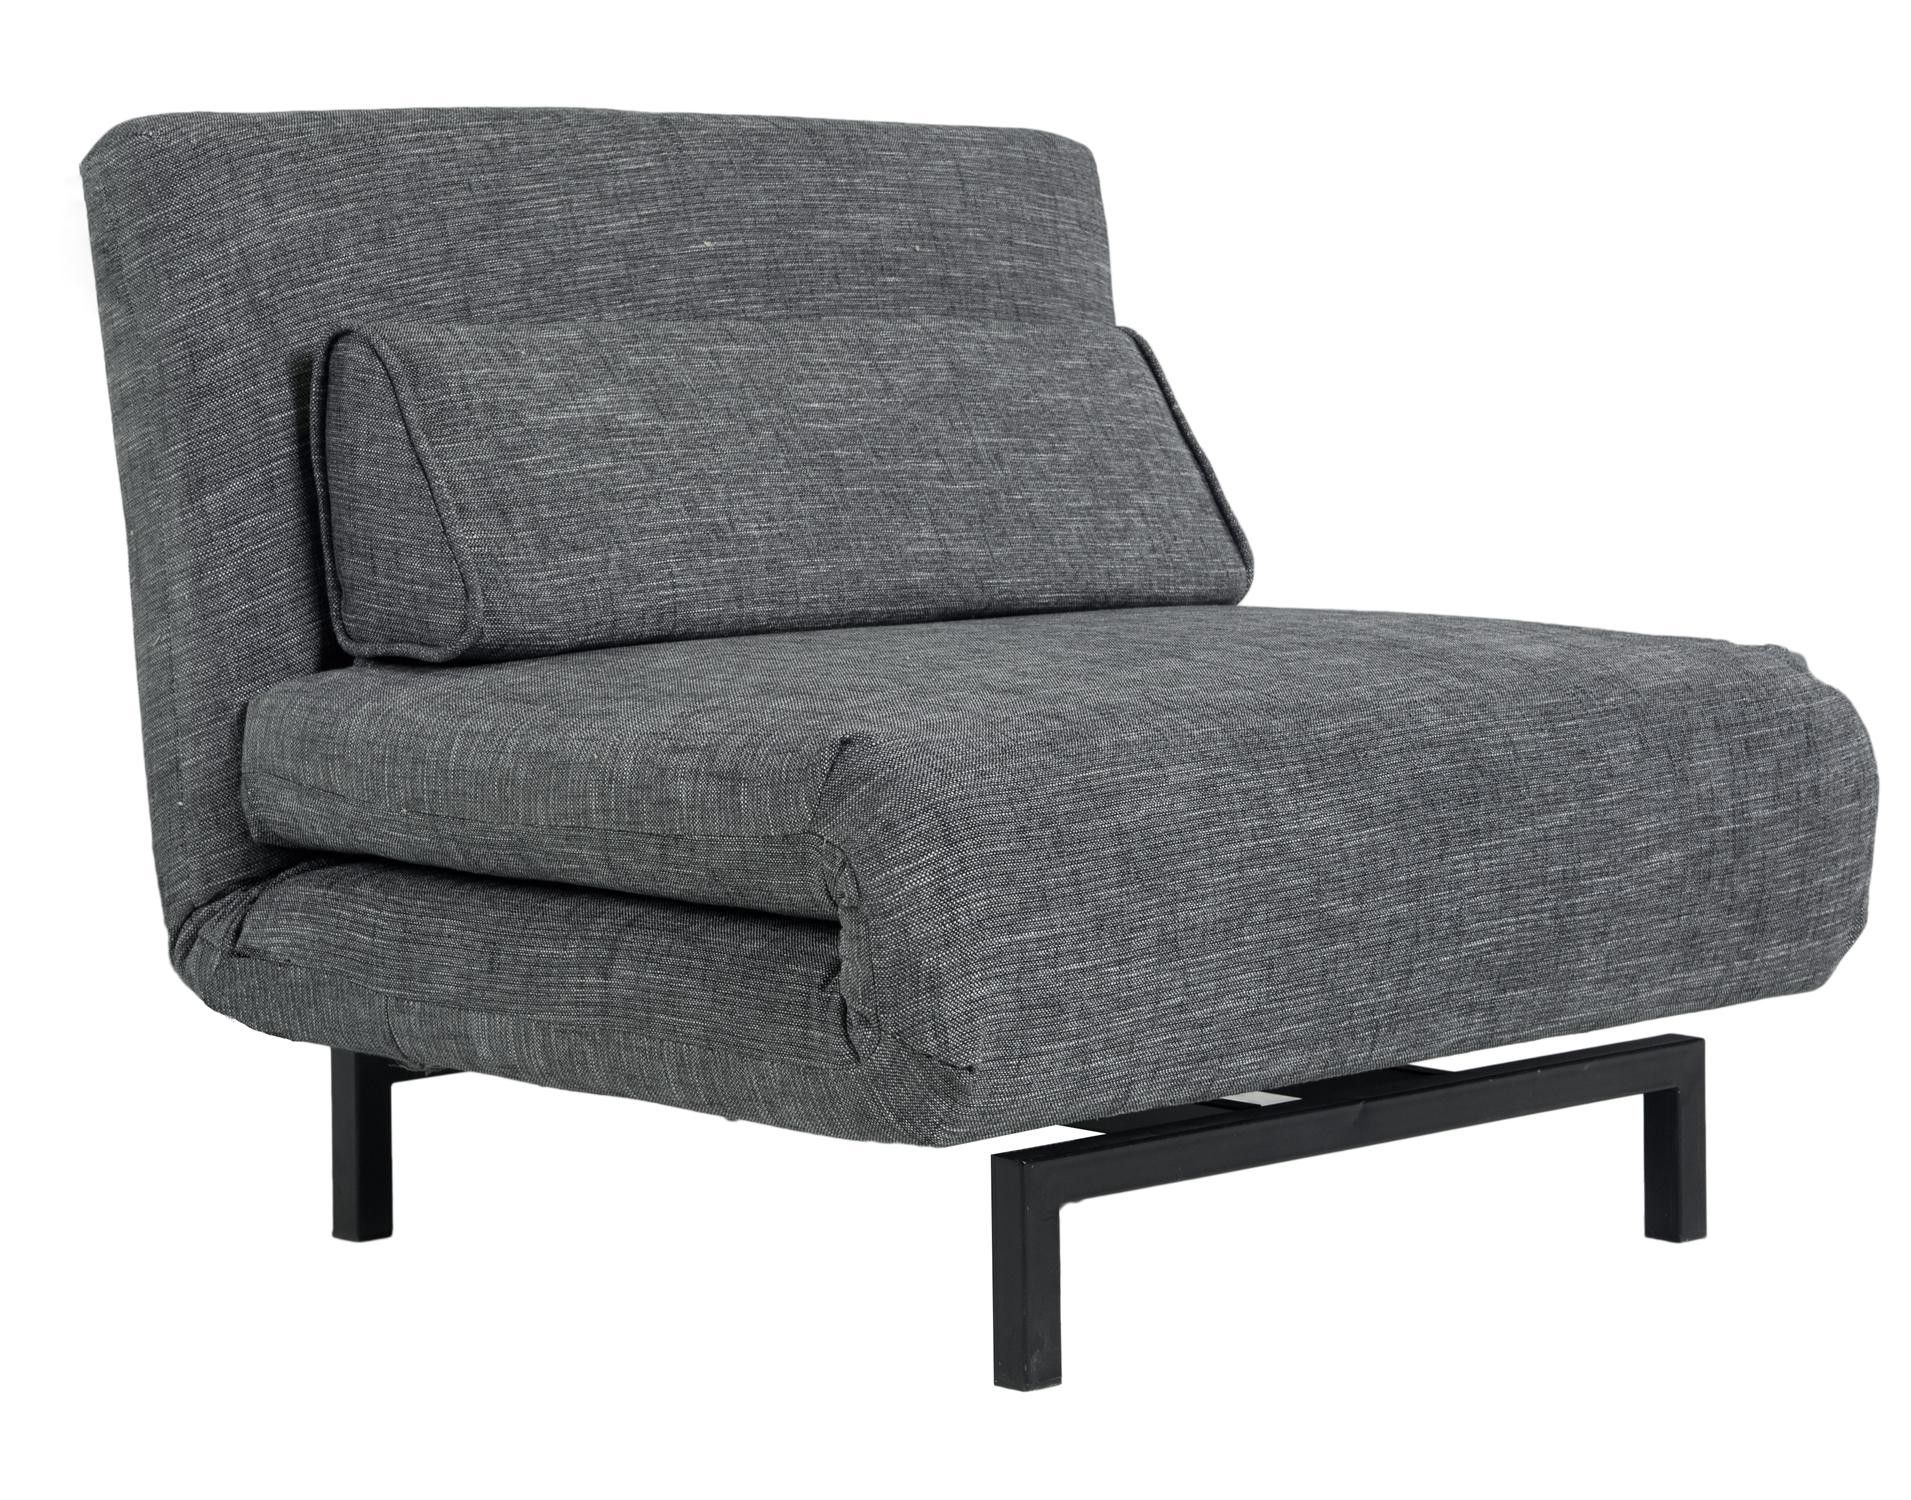 Sofas Center Single Chair Sofa Beds Model Ideas With Memory For Single Chair Sofa Bed (View 4 of 15)